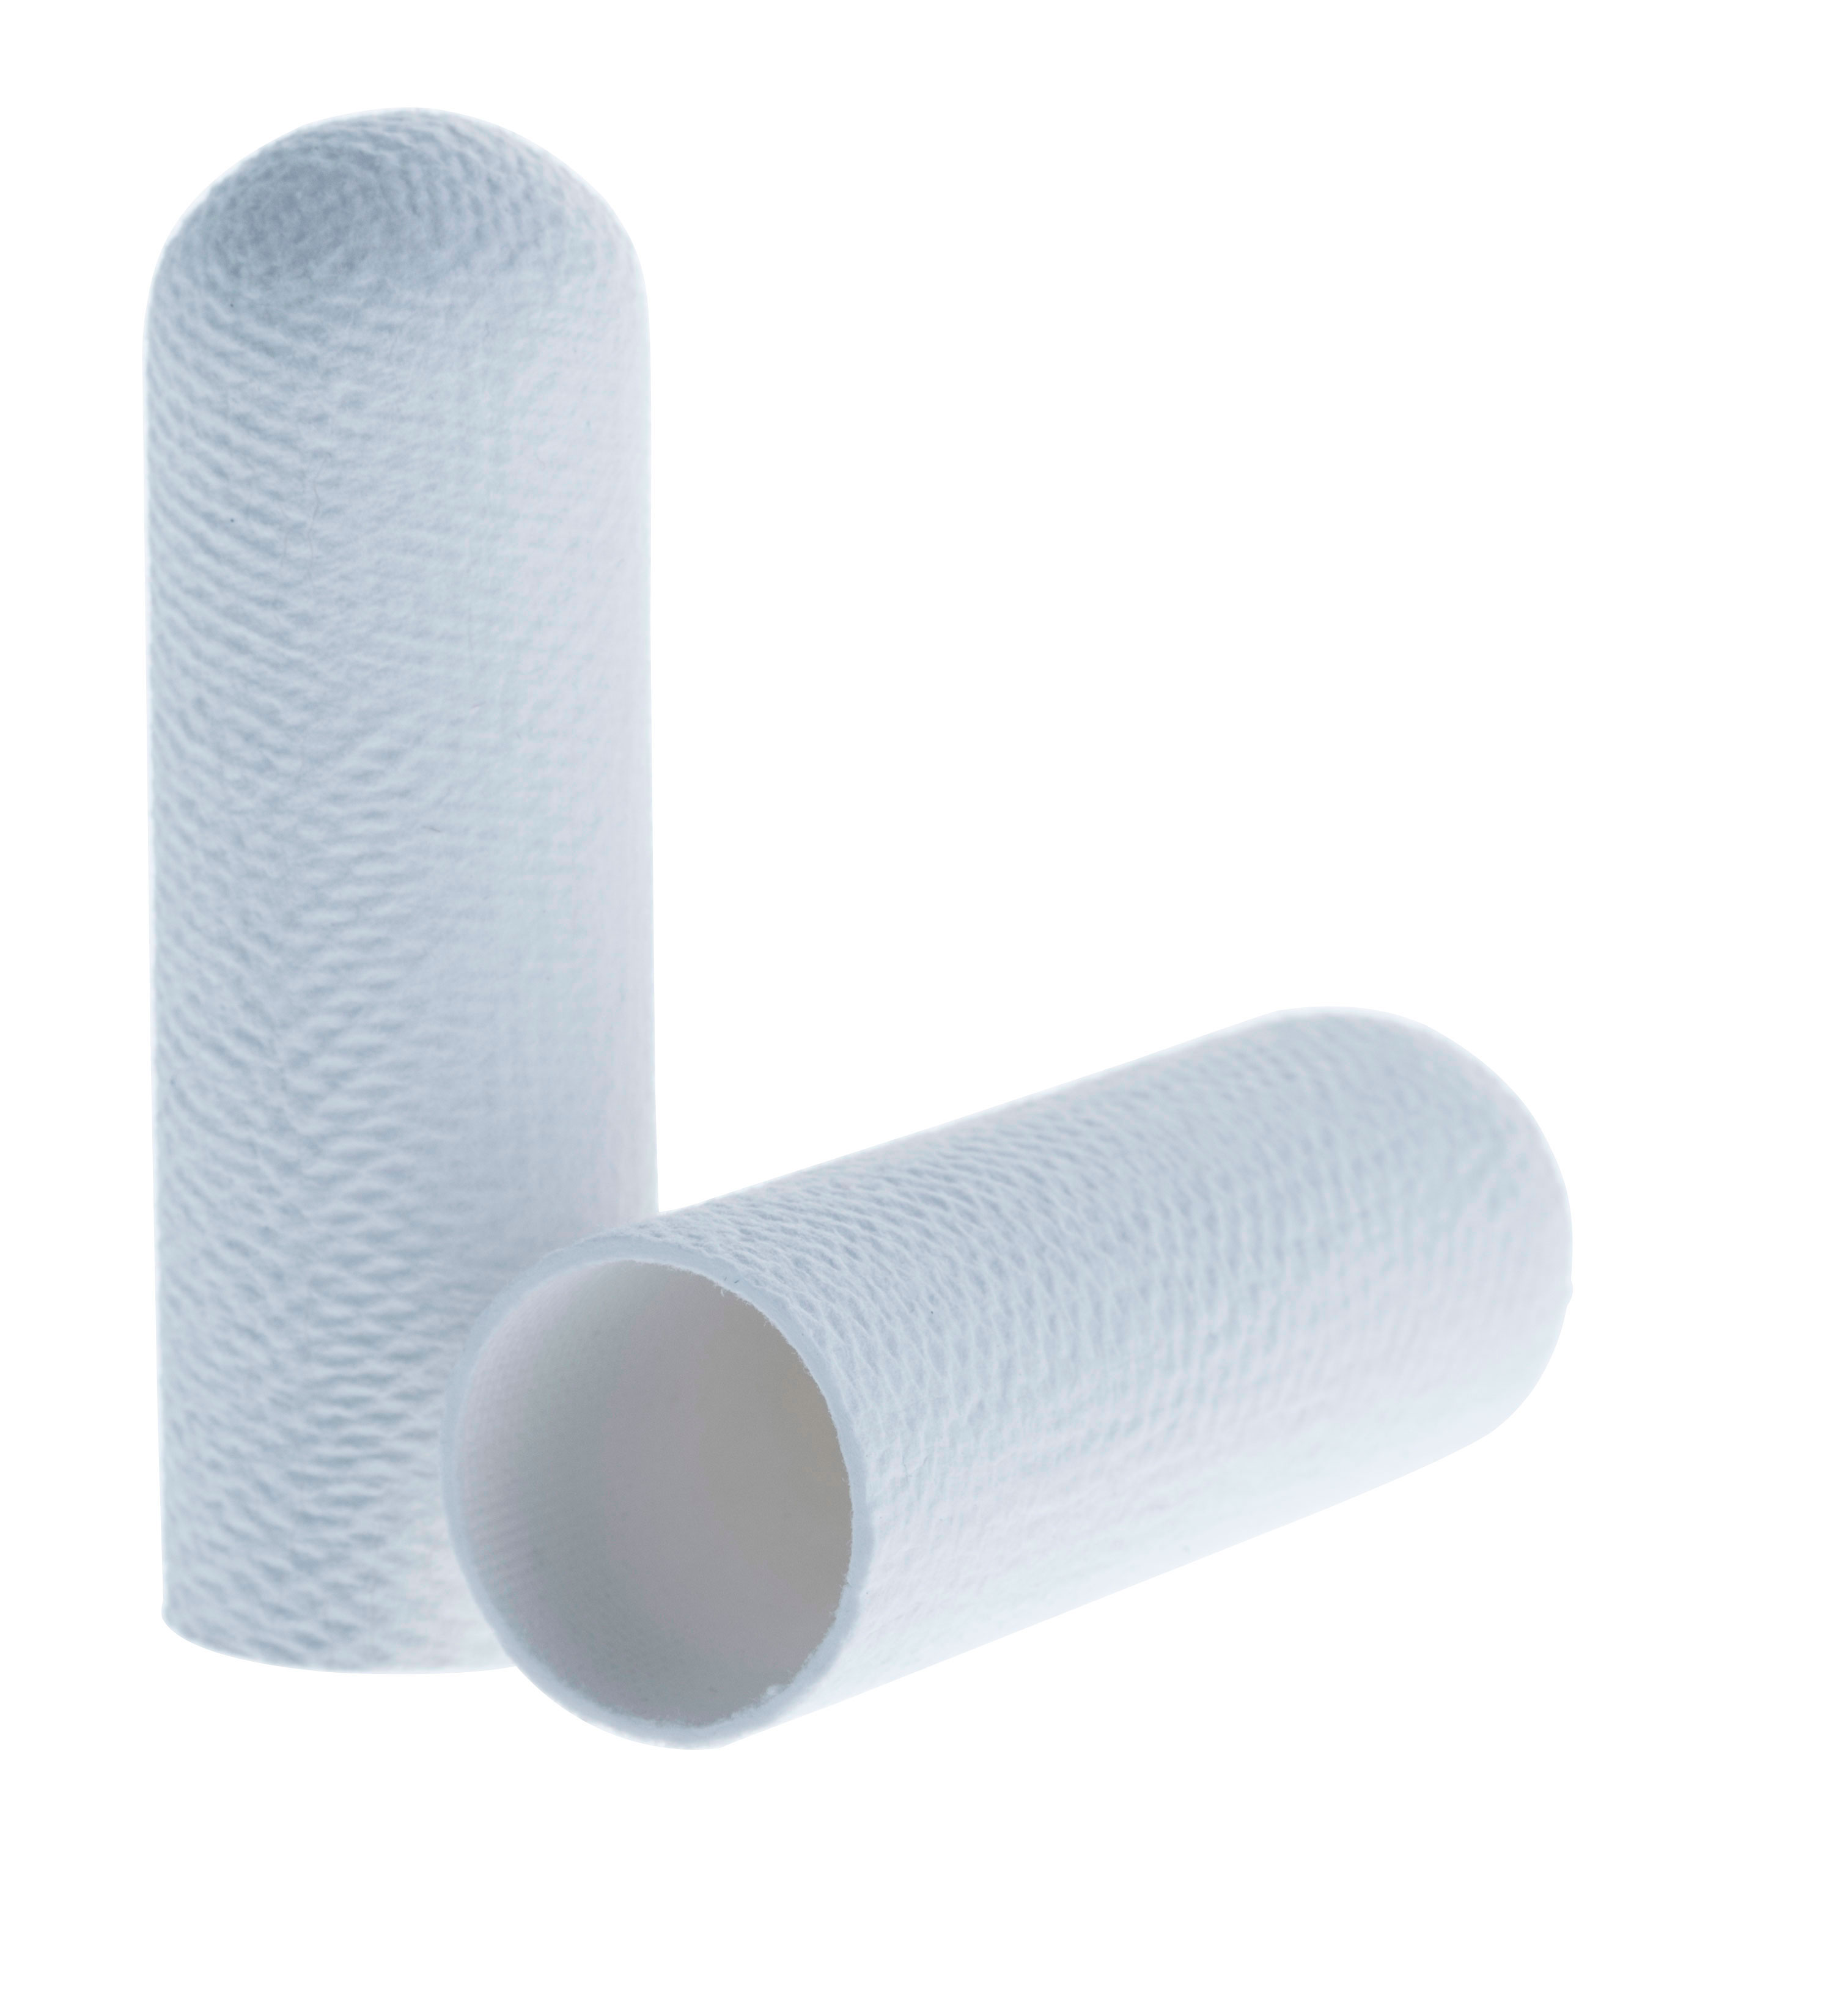 Cellulose extraction thimbles for Soxhlet extraction. SCHARLAU. Standard cellulose cartridge. Dim. Øxlength: 19x90mm. Particle retention in liquid: Nom. 8-15 microns